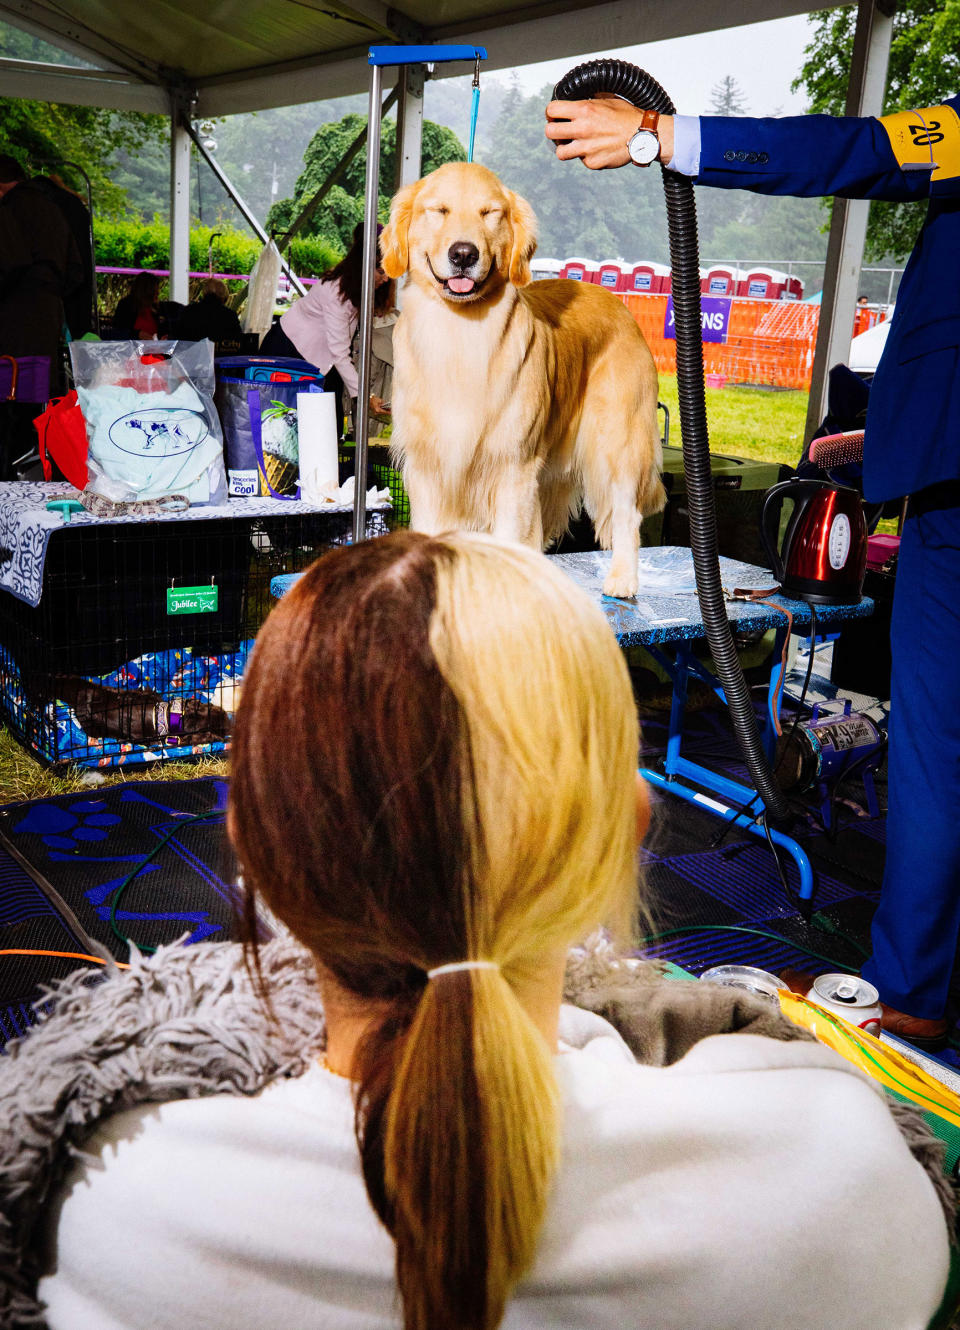 Vixen, a Golden Retriever, is groomed before competing at the 146th annual Westminster Kennel Club show in Tarrytown, NY on June 22.<span class="copyright">Sinna Nasseri</span>